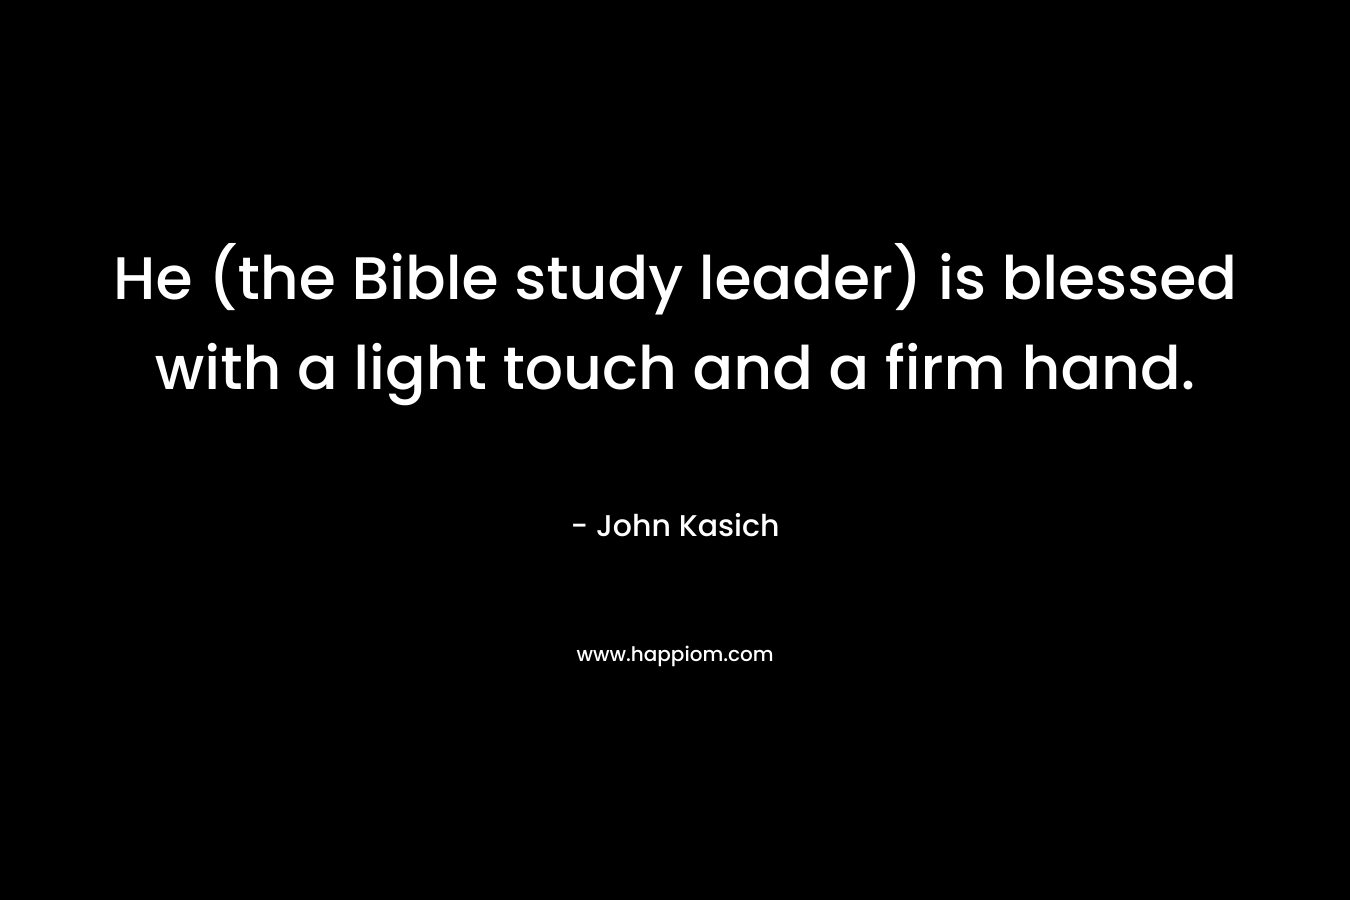 He (the Bible study leader) is blessed with a light touch and a firm hand.